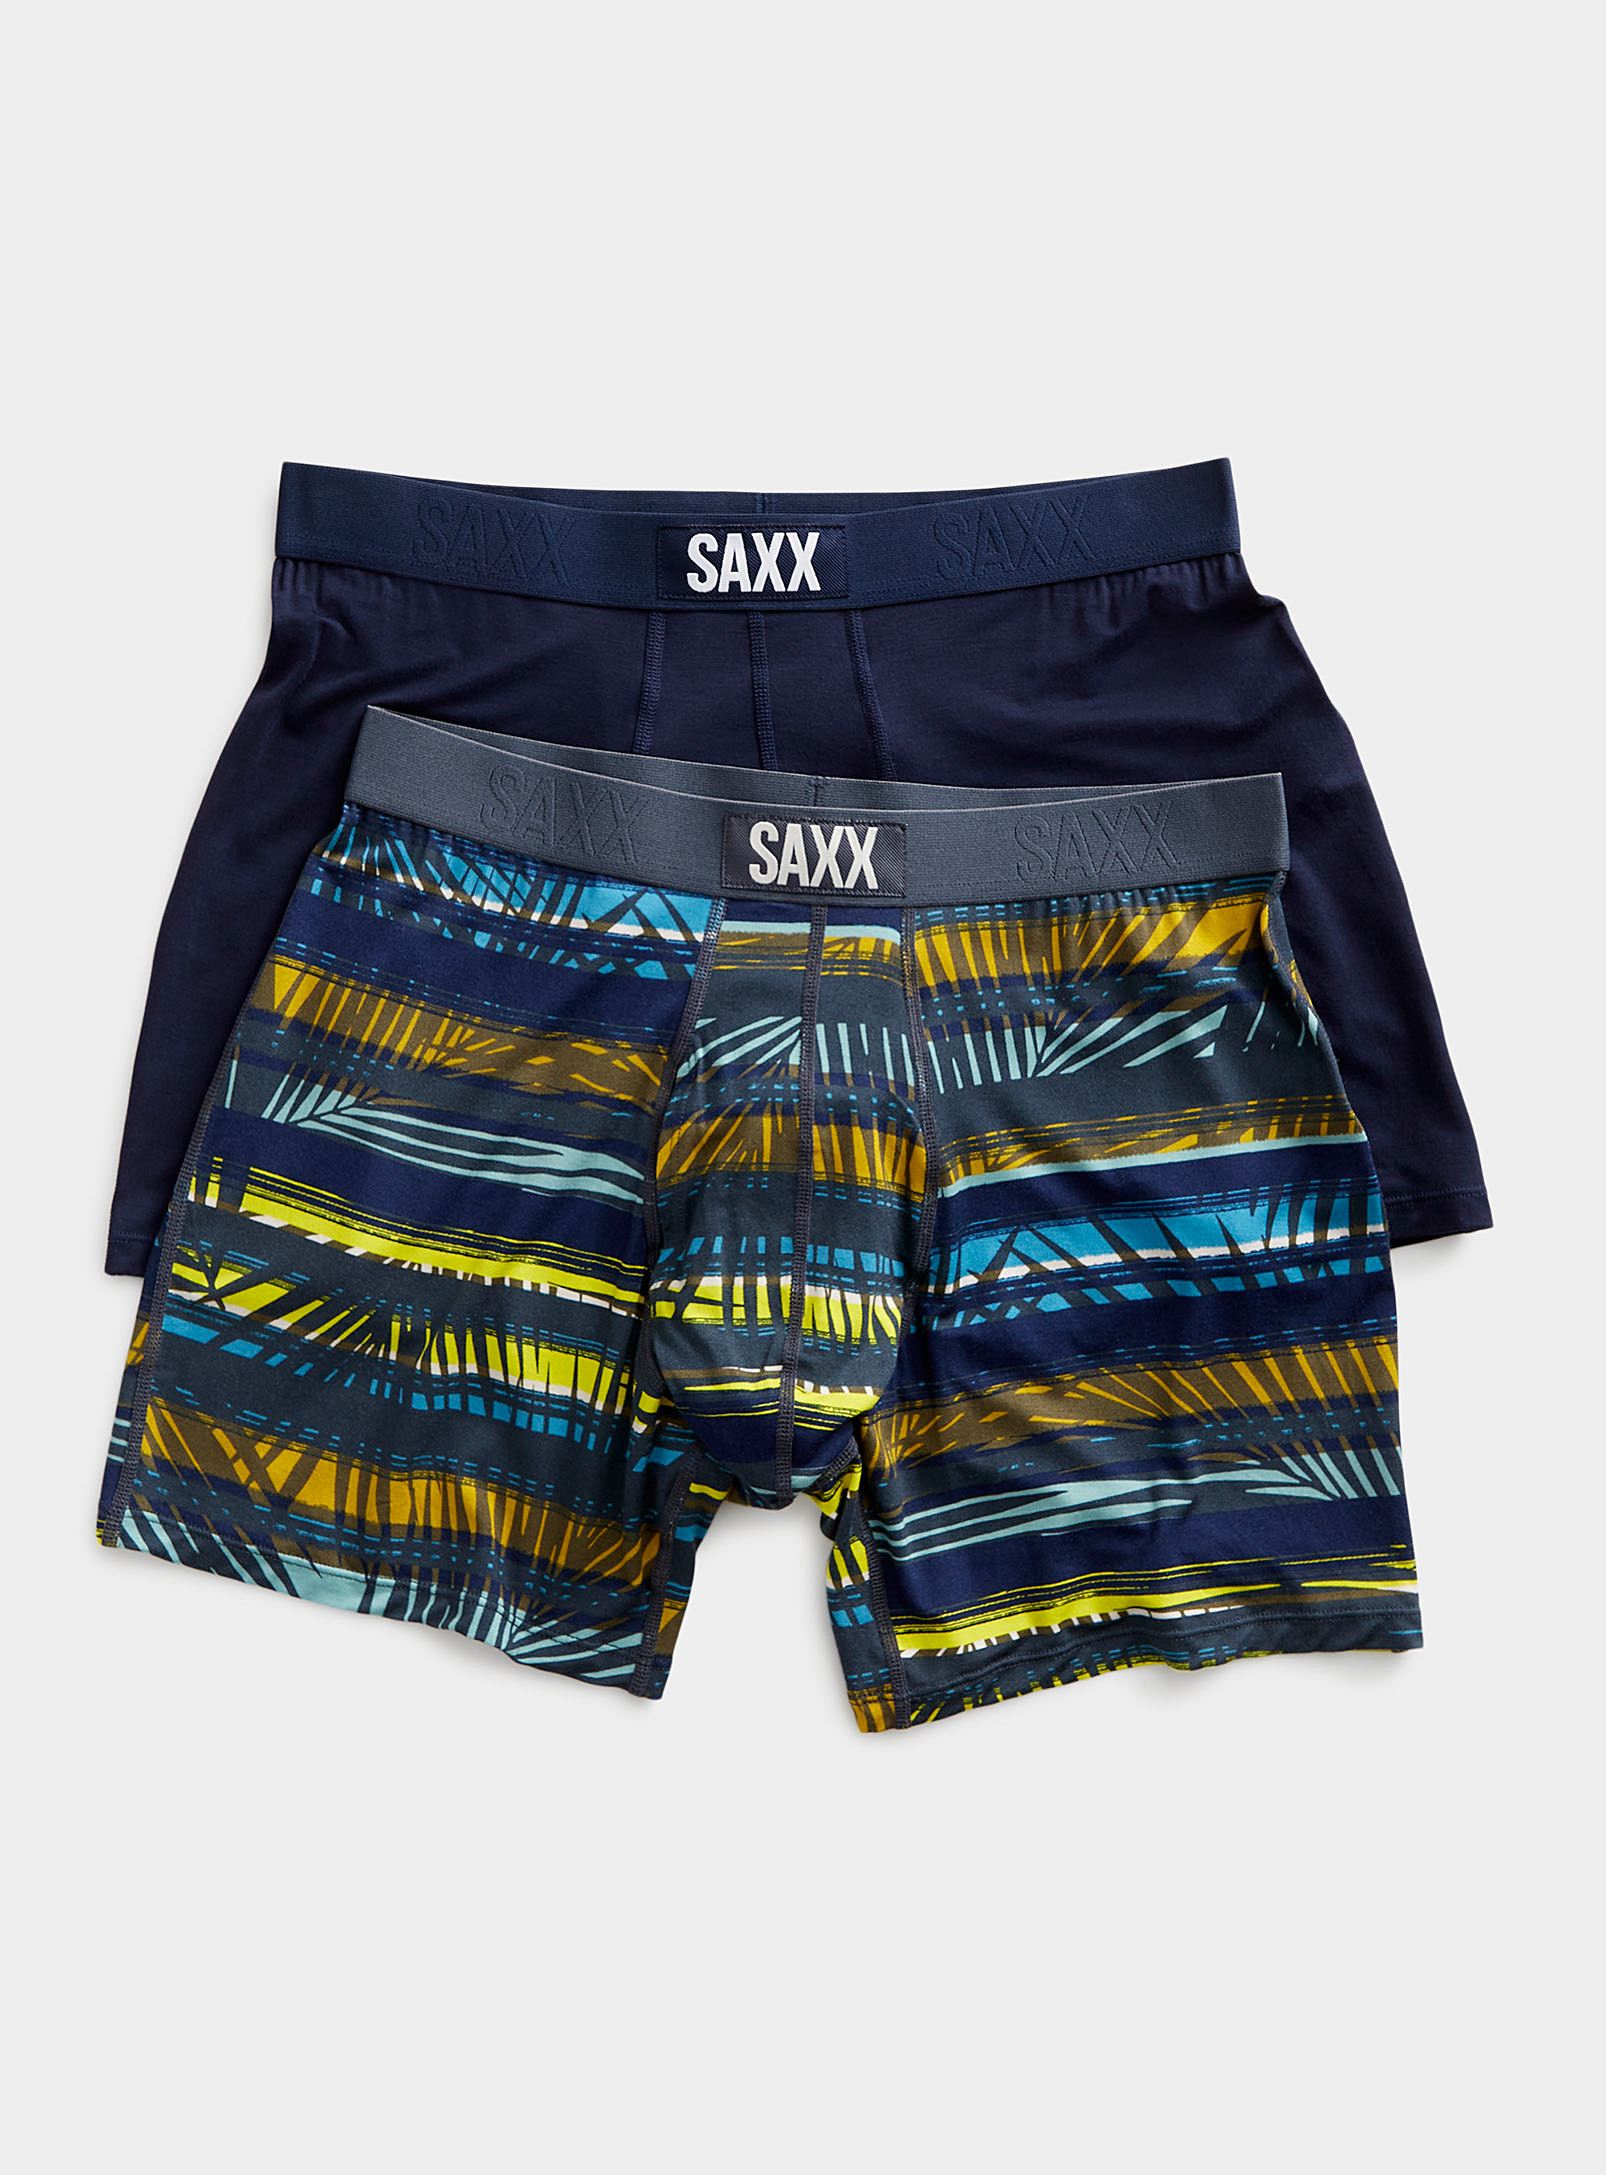 Saxx 2-pack In Patterned Blue